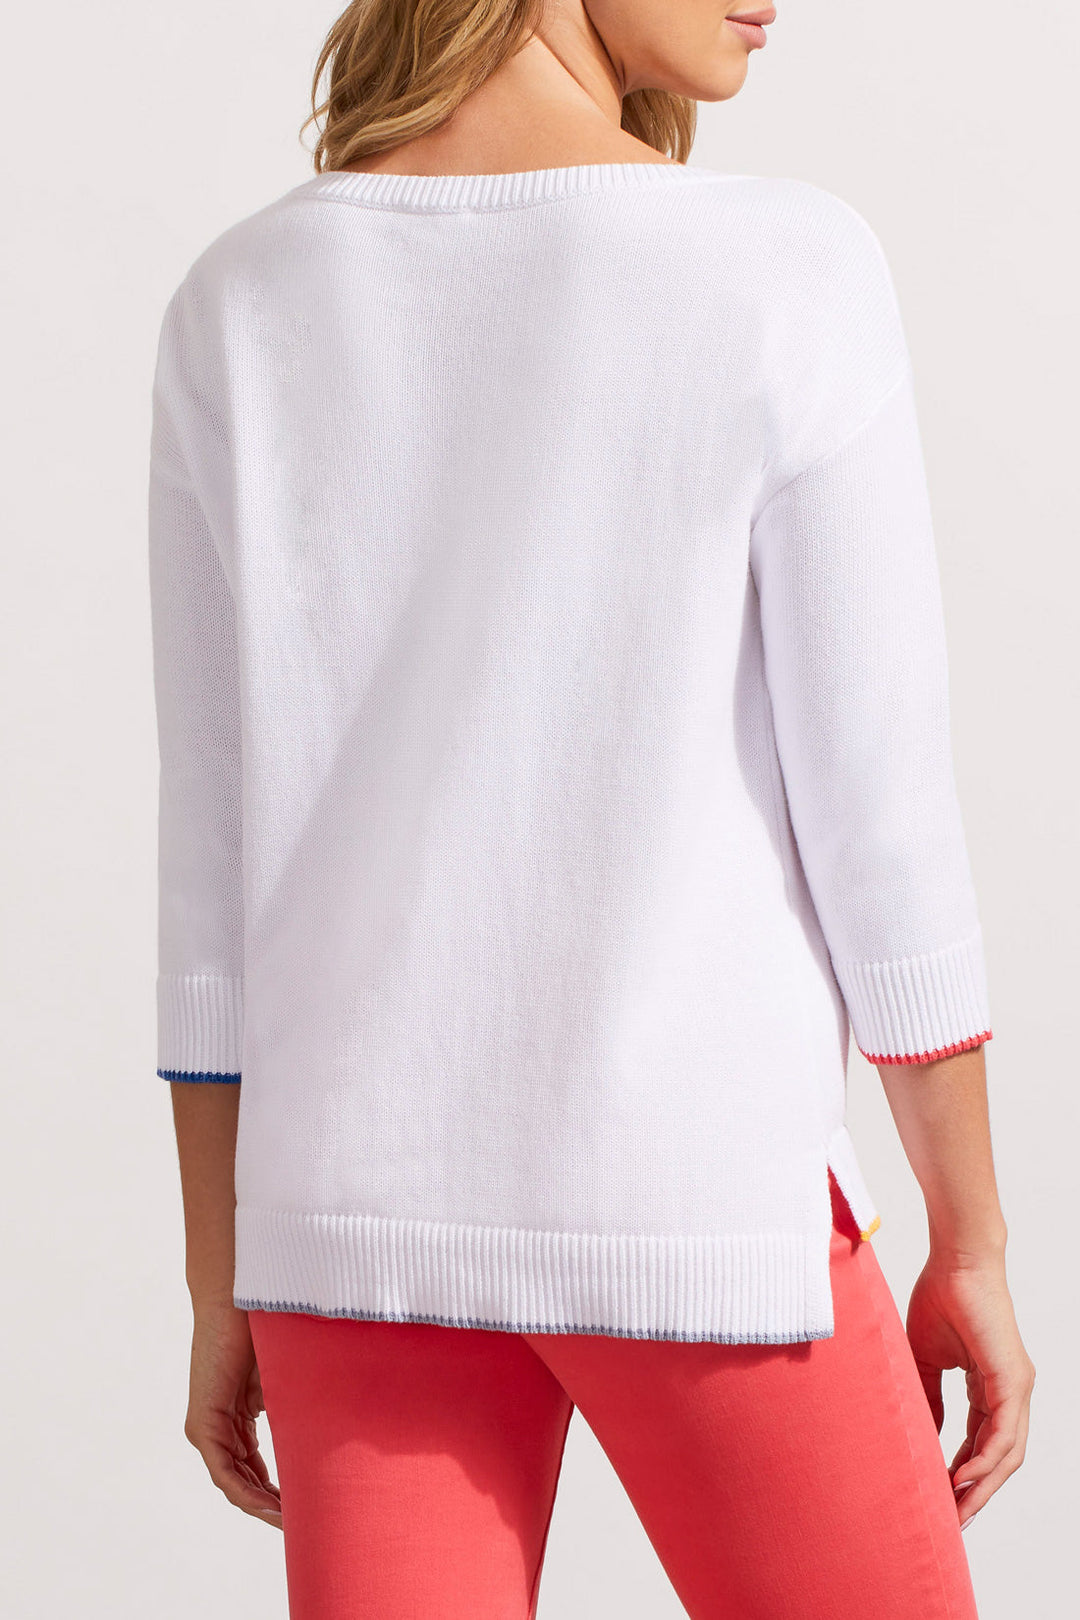 3/4 Sleeve Boat Neck Embrod Detail Sweater